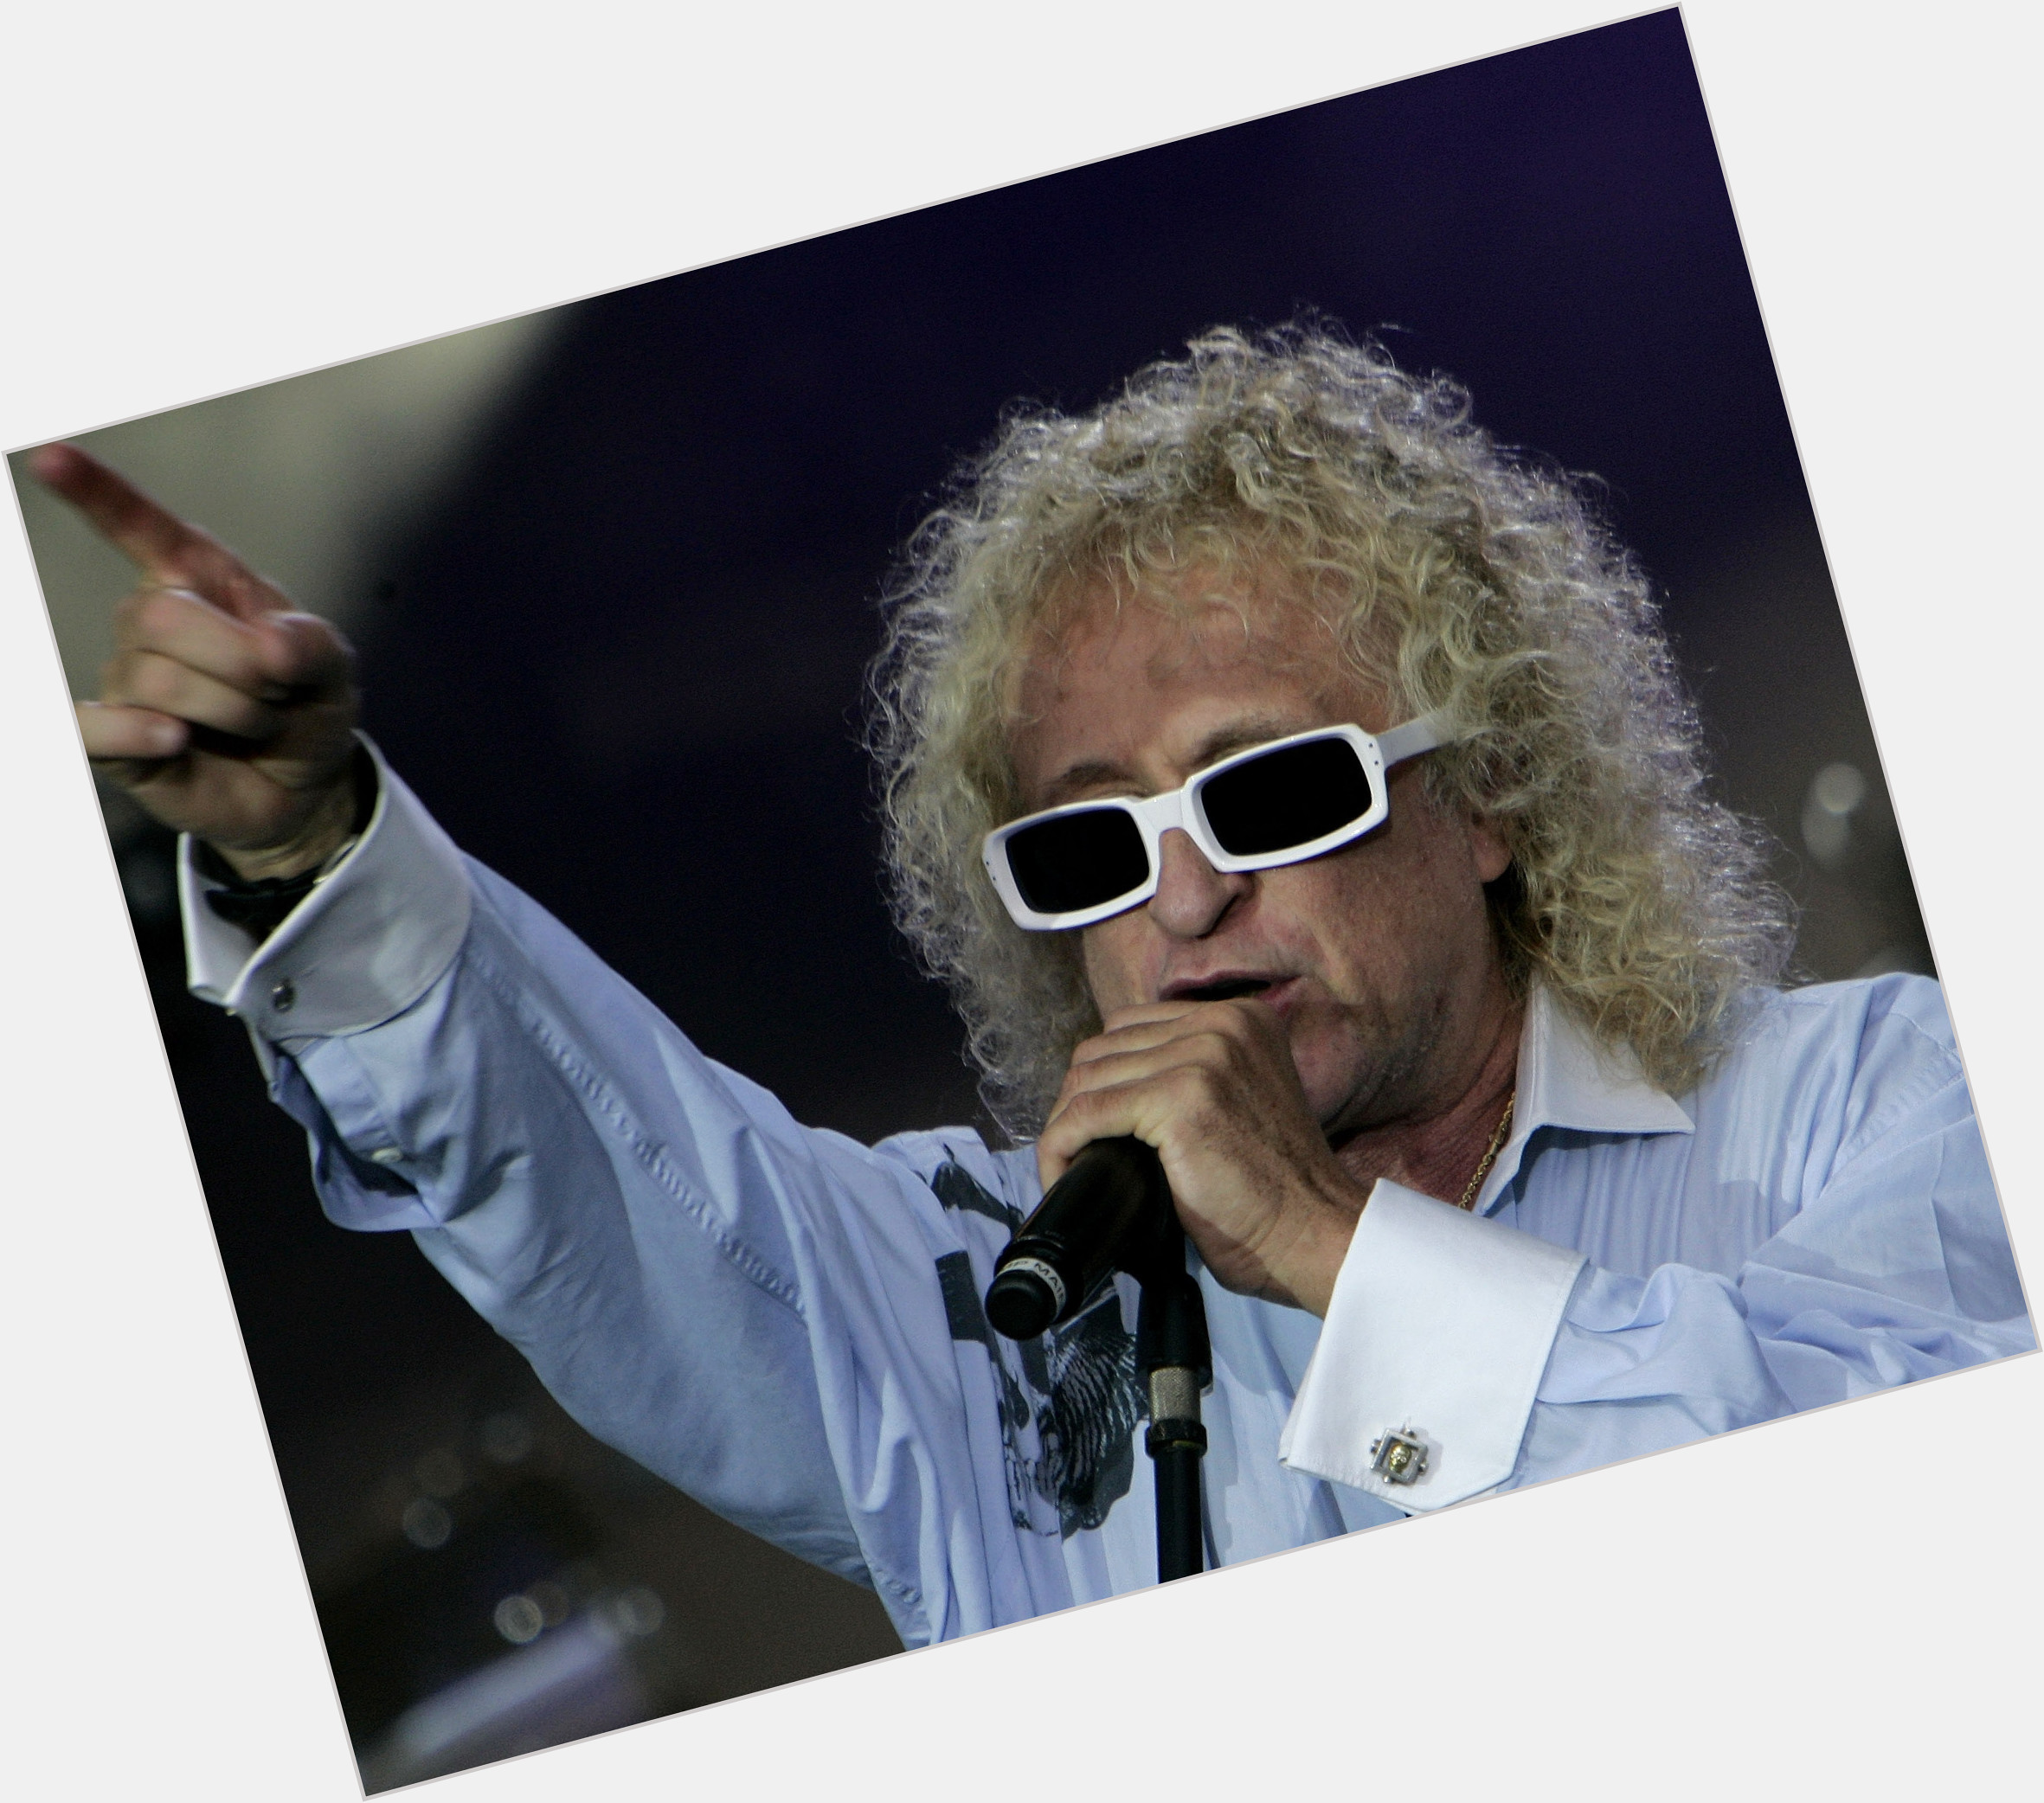 Michel Polnareff Large body,  dyed blonde hair & hairstyles